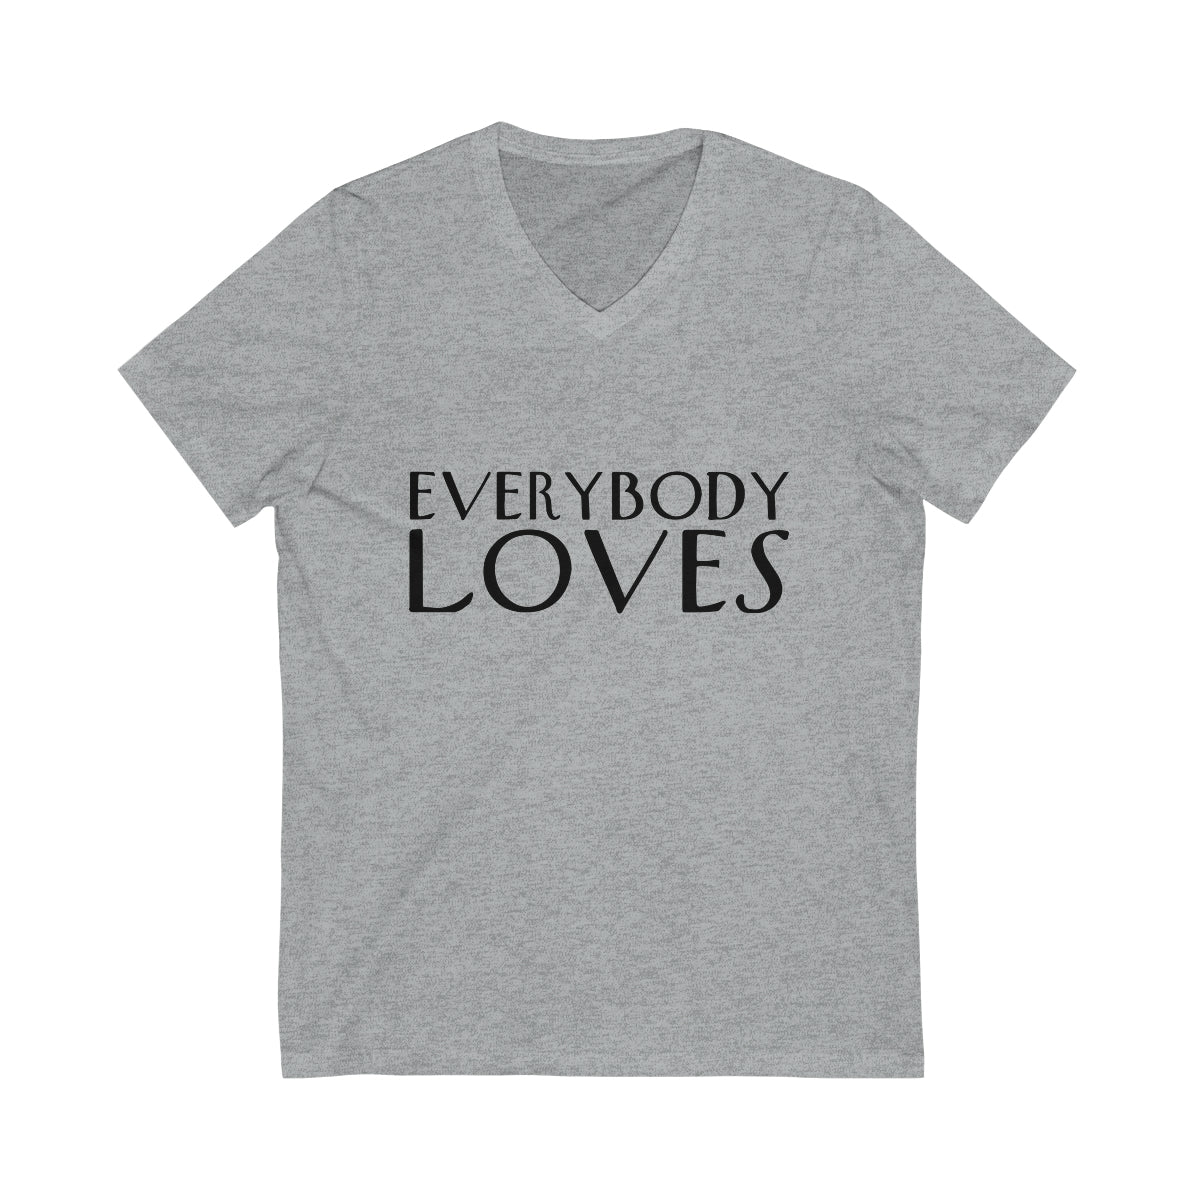 "Everybody Loves" Tee (Light Colors)